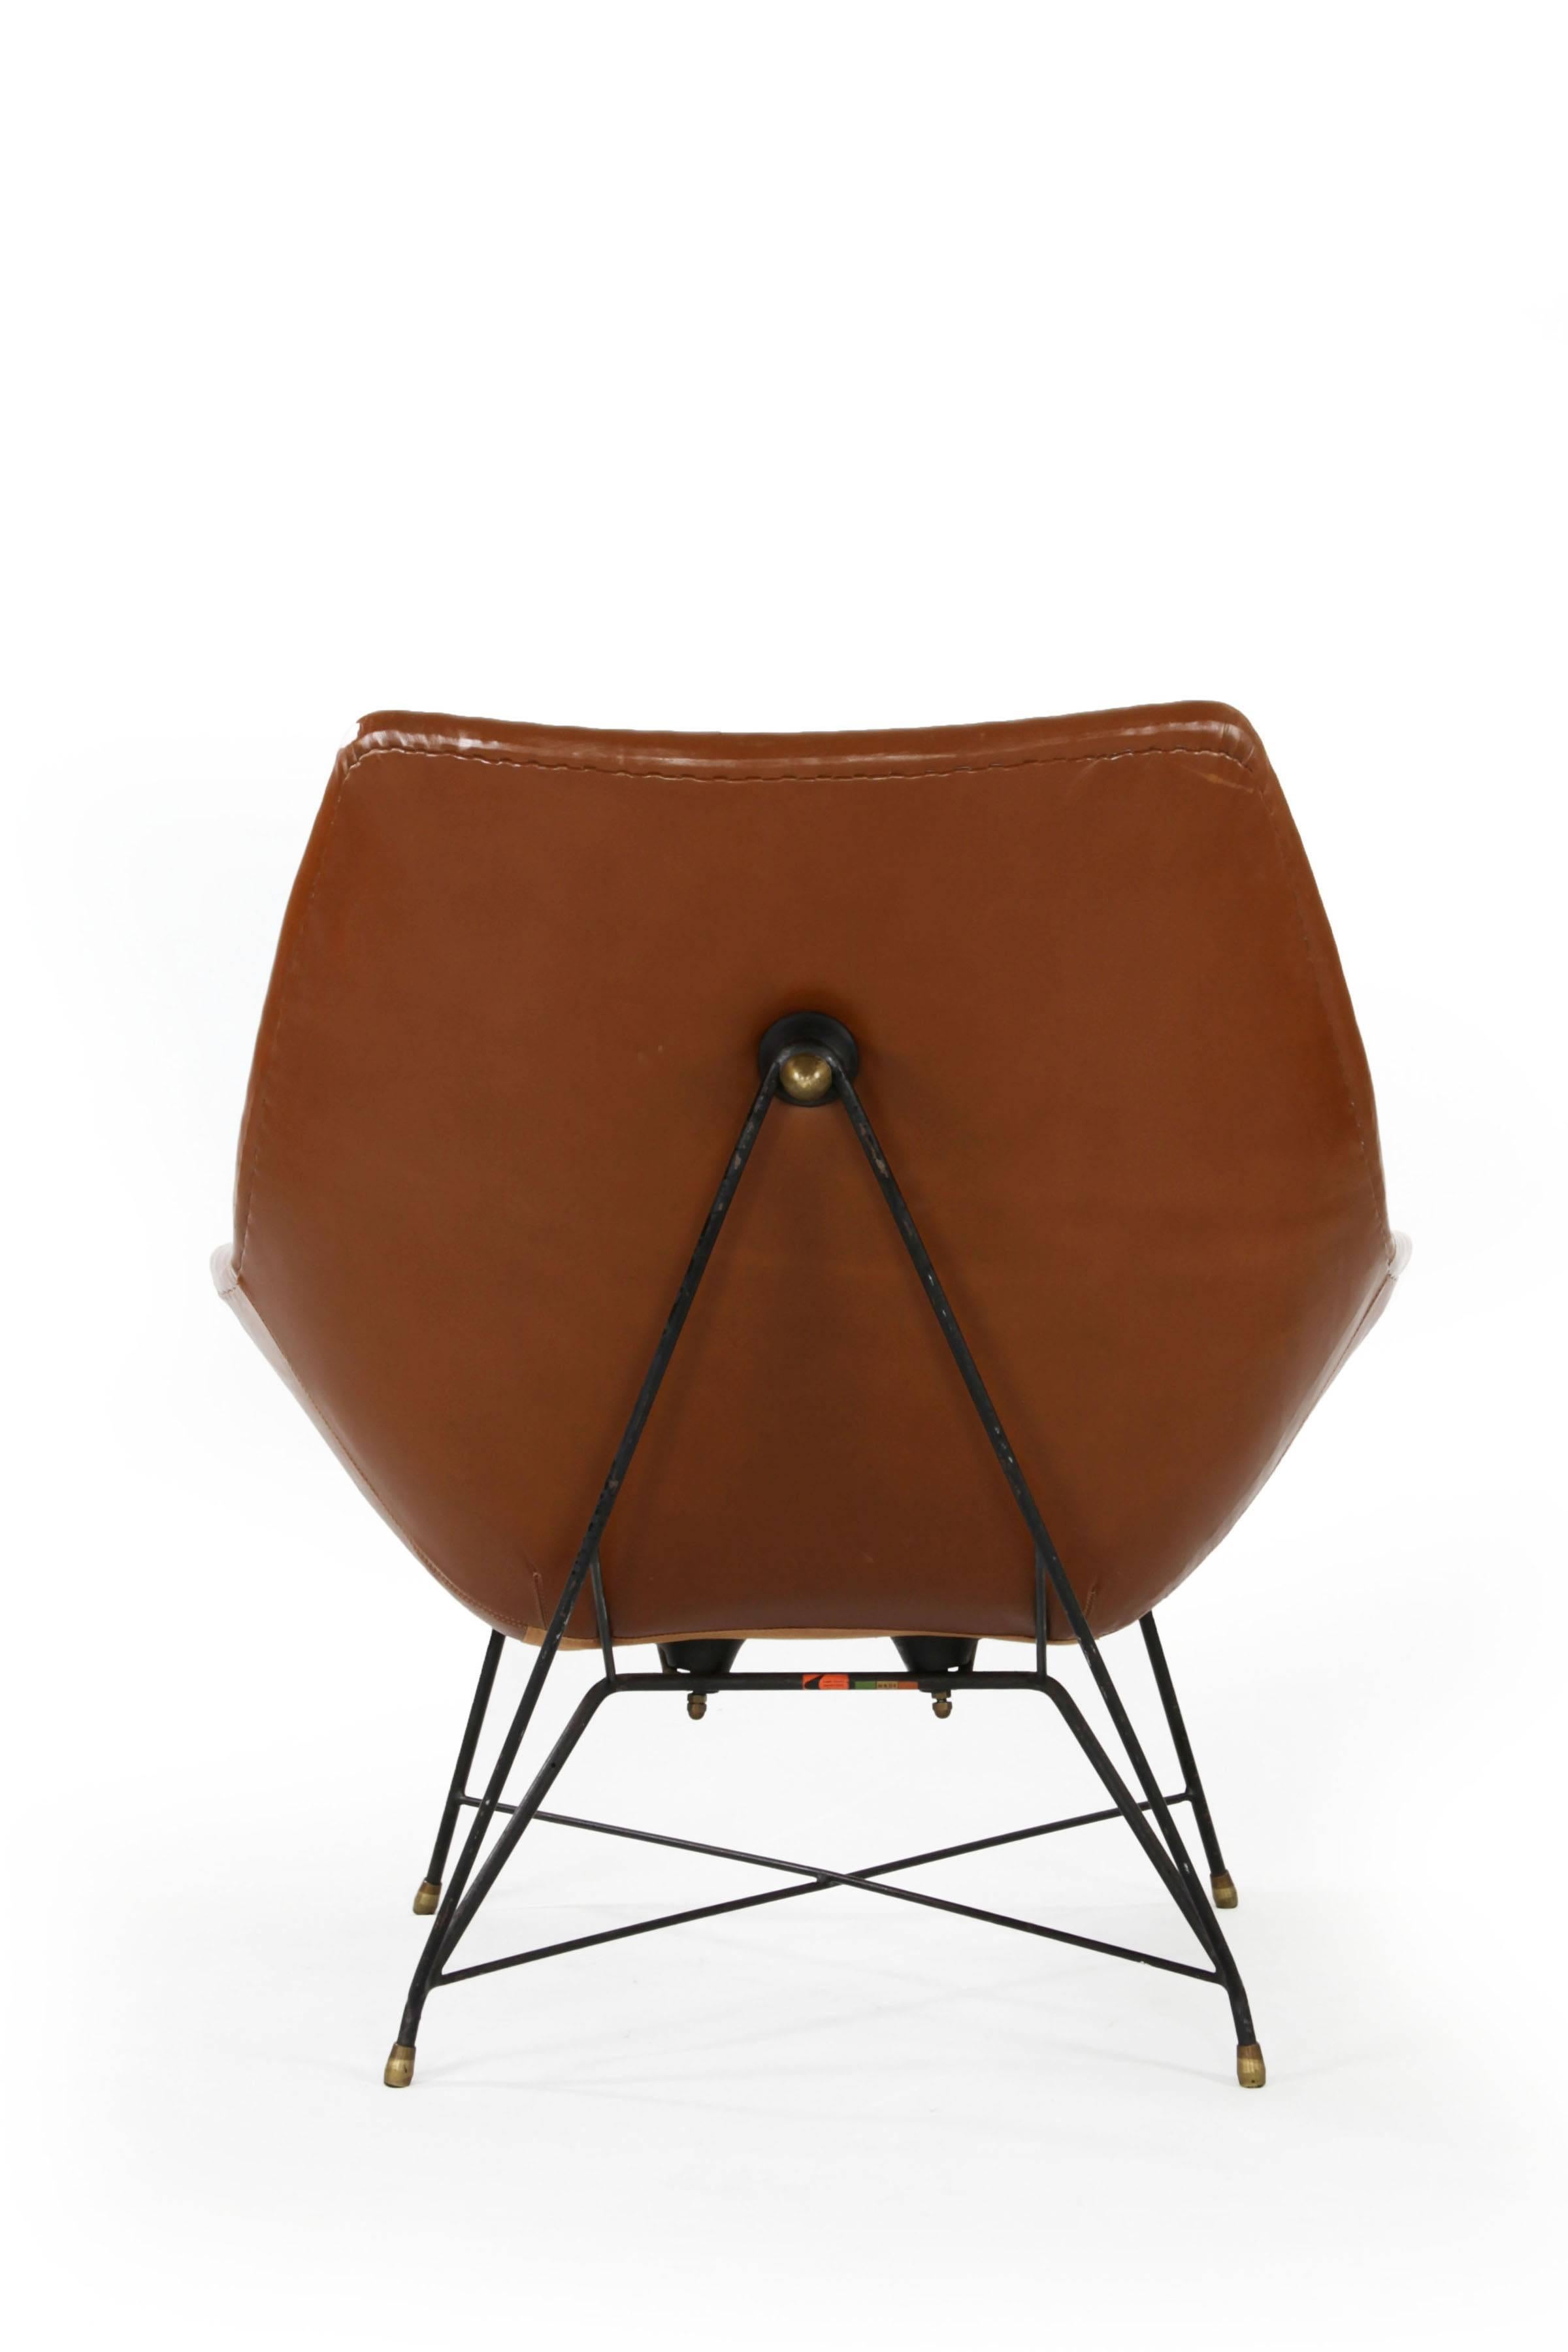 Italian Brown Leather Kosmos Chair Design by Augusto Bozzi for Saporiti, 1954 In Fair Condition For Sale In Wolfurt, AT